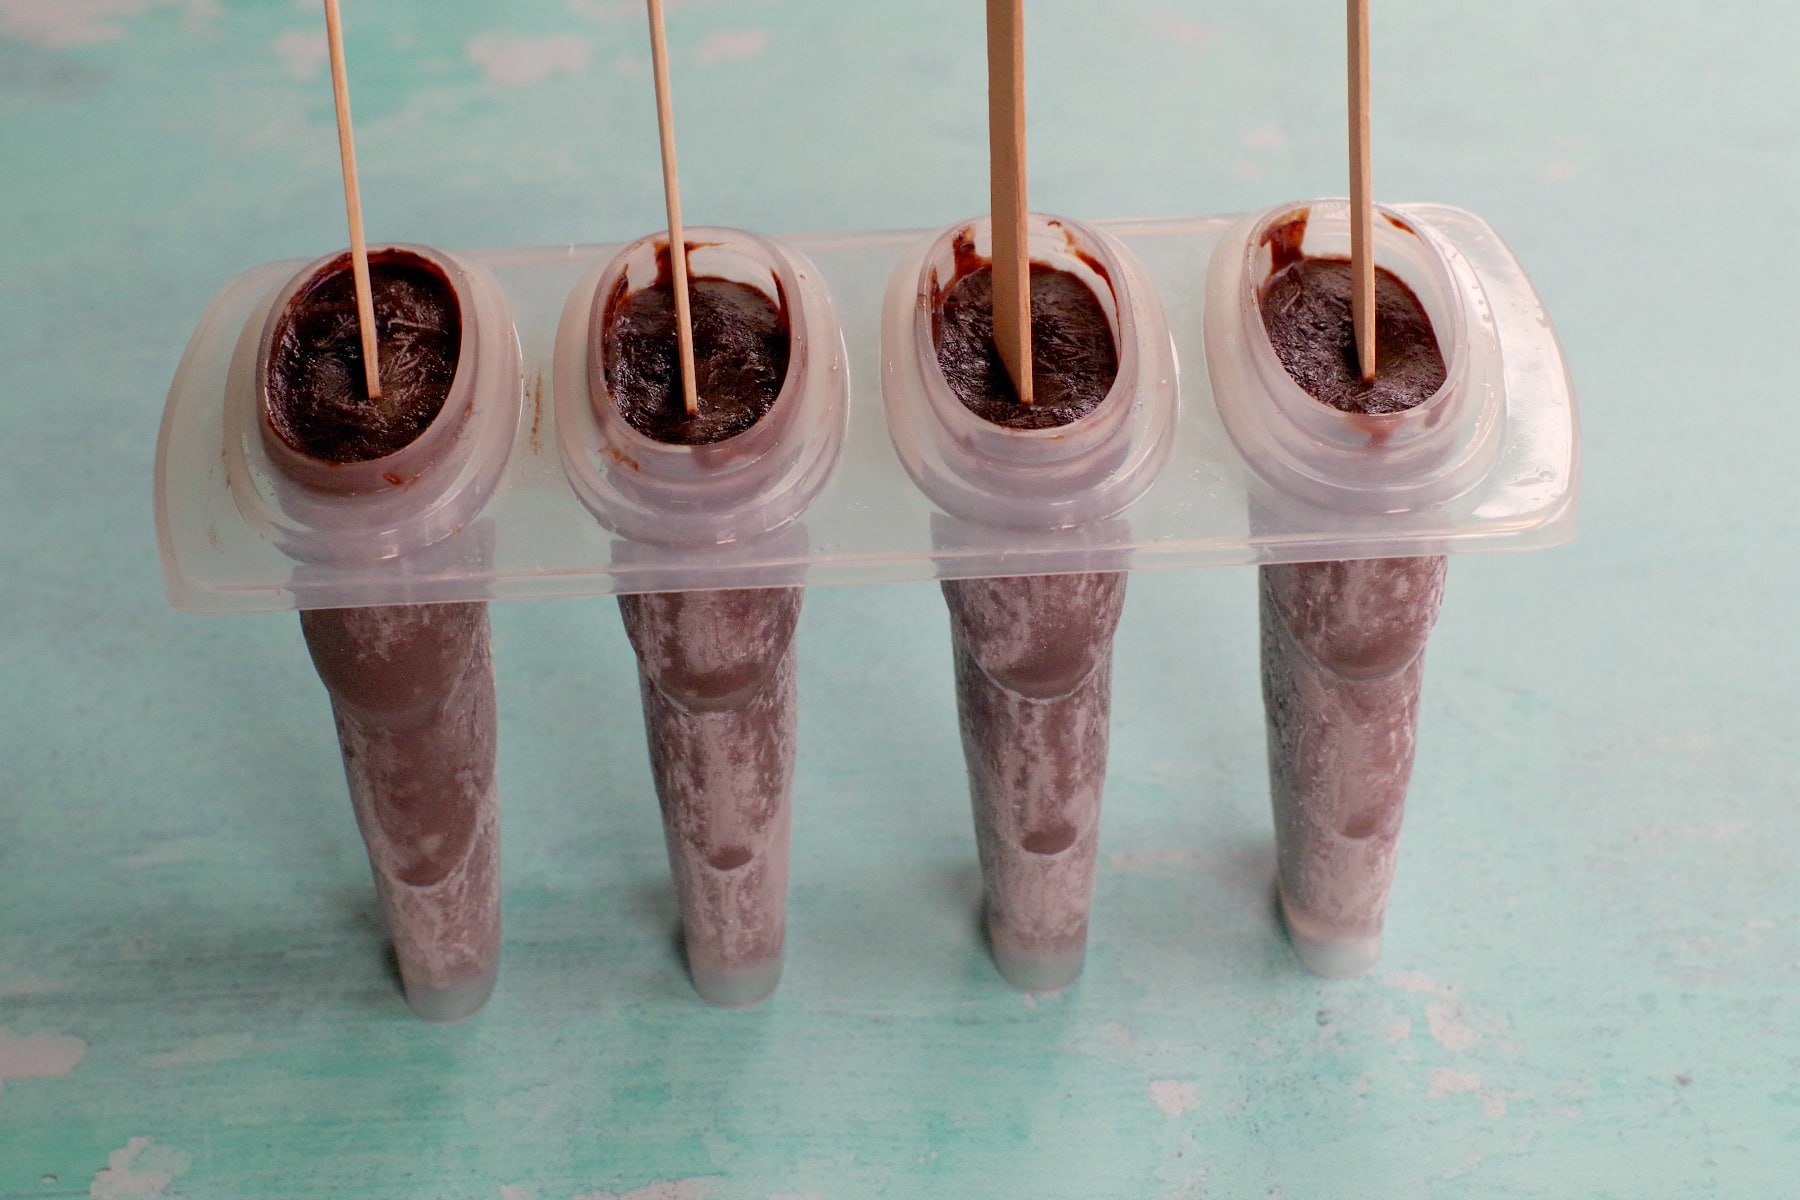 Chocolate Banana Popsicles in mold